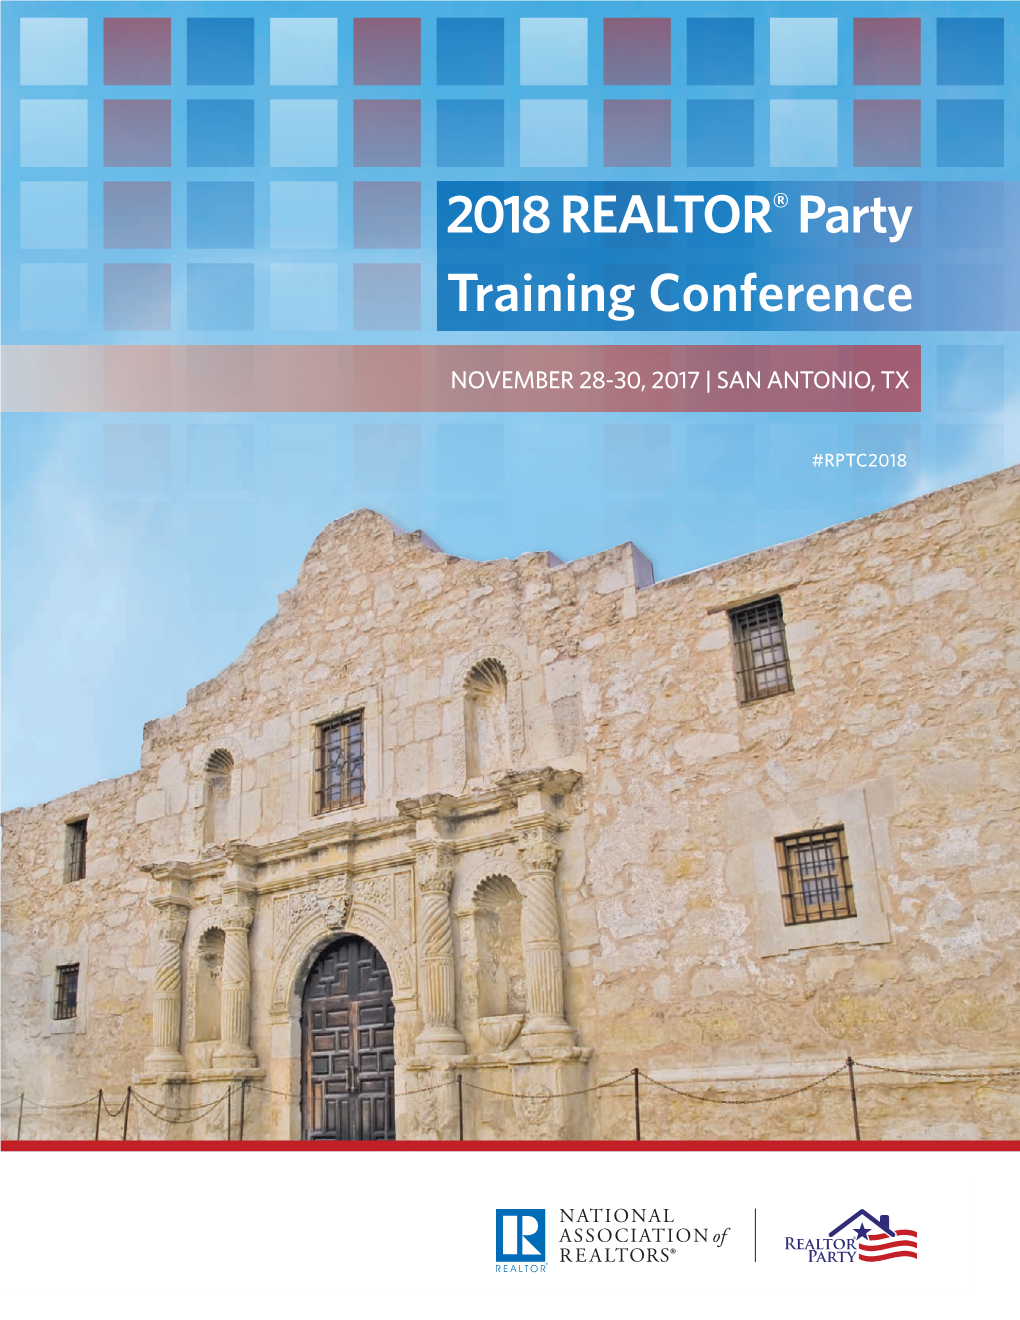 2018 REALTOR® Party Training Conference